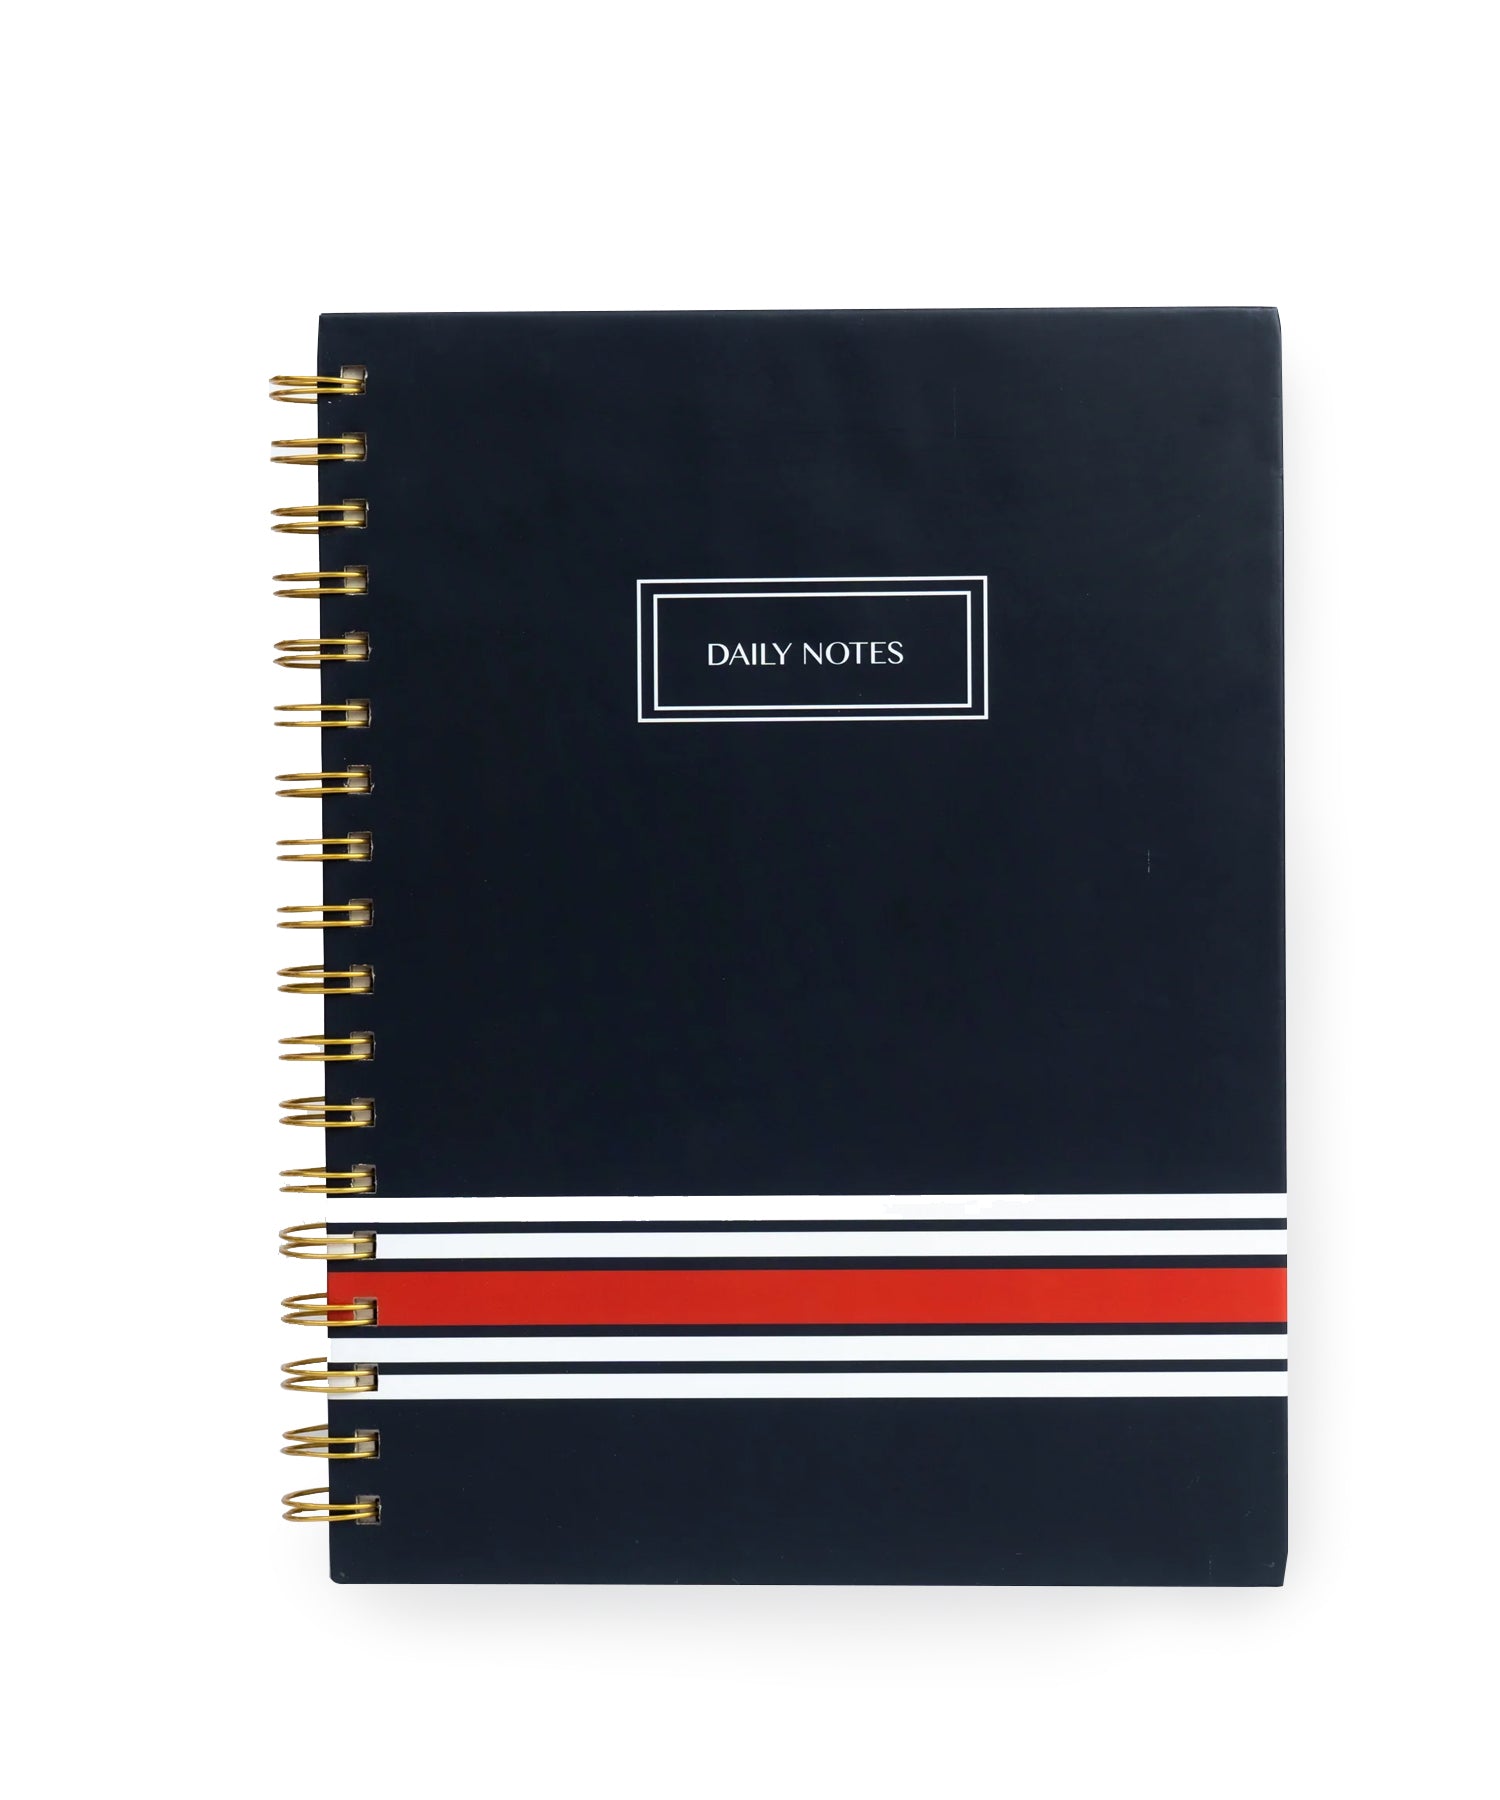 DAILY NOTES- WIRO NOTEBOOK